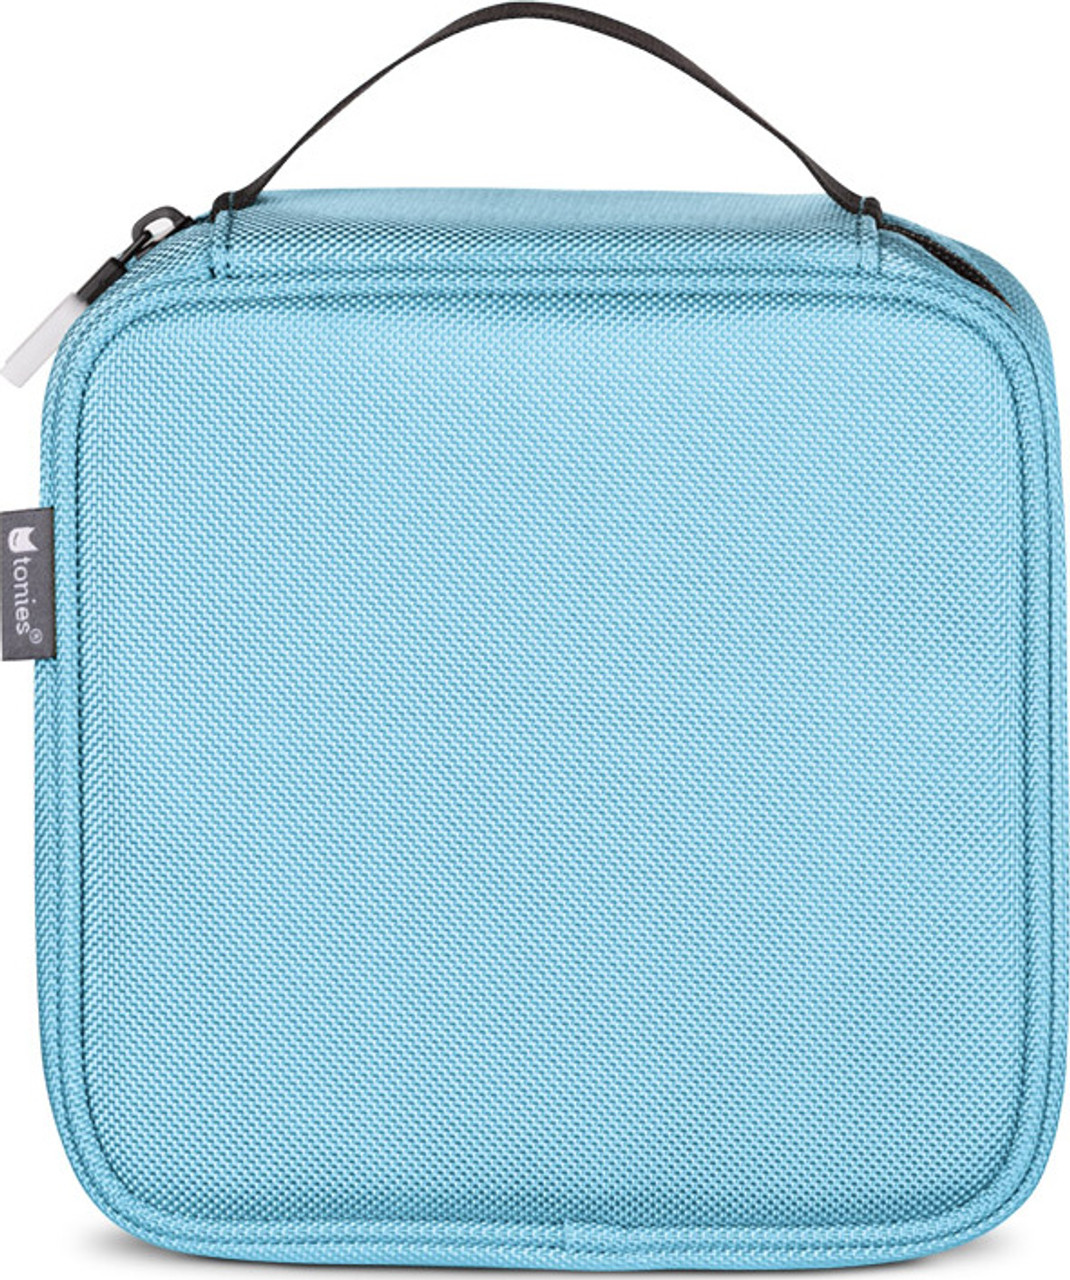 tonies - Carrying Case Light Blue 2